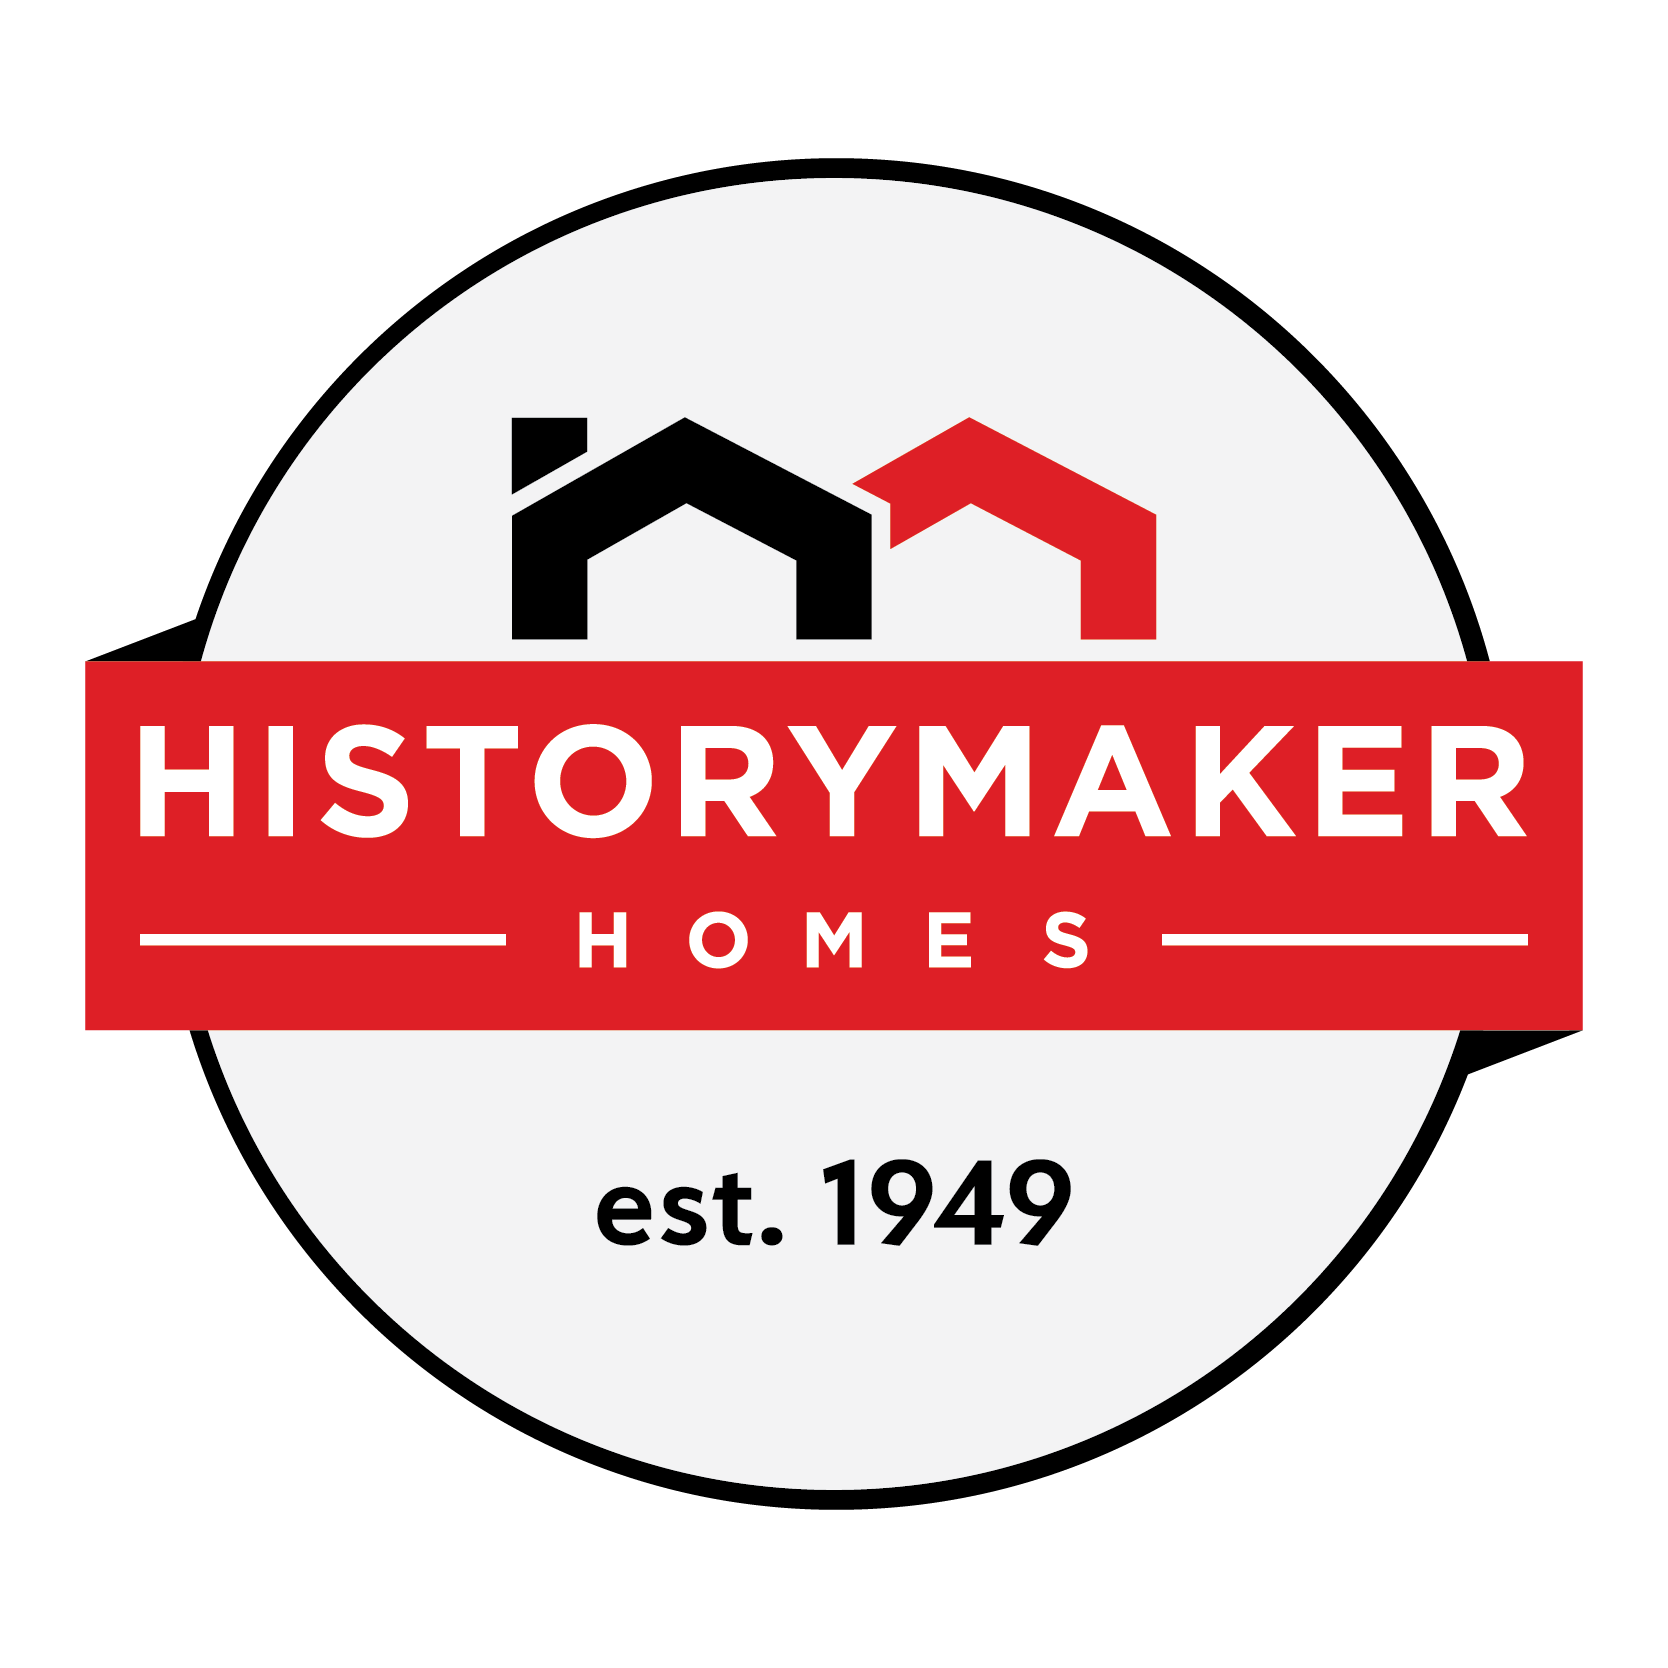 HistoryMaker Homes offers new townhomes for sale in Sienna